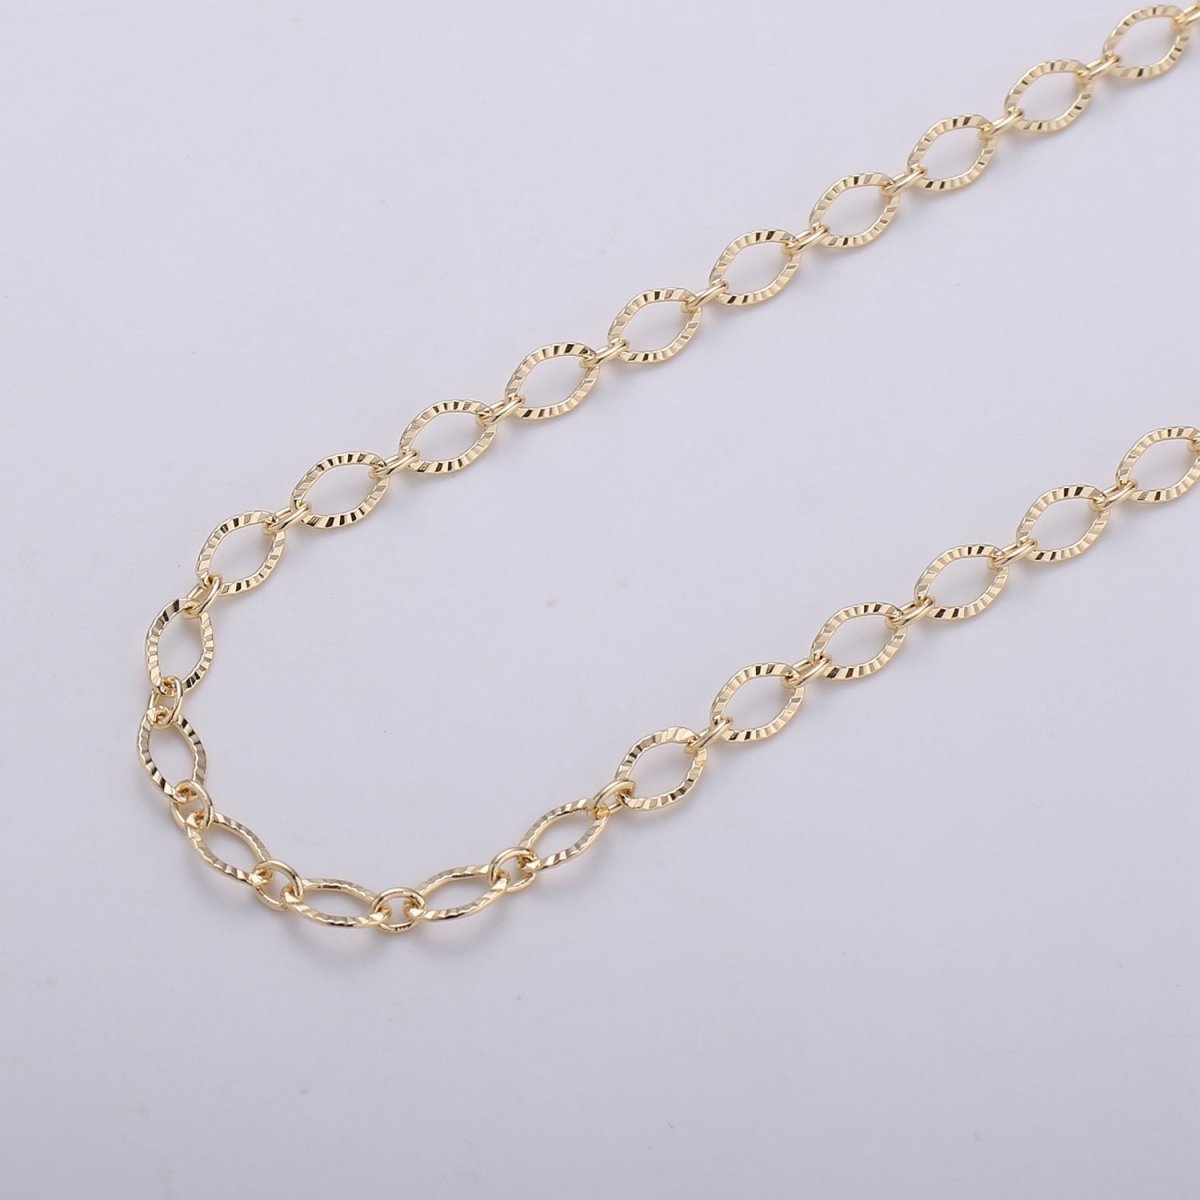 16K Gold Filled Oval Unique Rolo Chain by Yard, Wholesale bulk Roll Chain for Jewelry Making, Width 4.2mm | ROLL-262 - DLUXCA